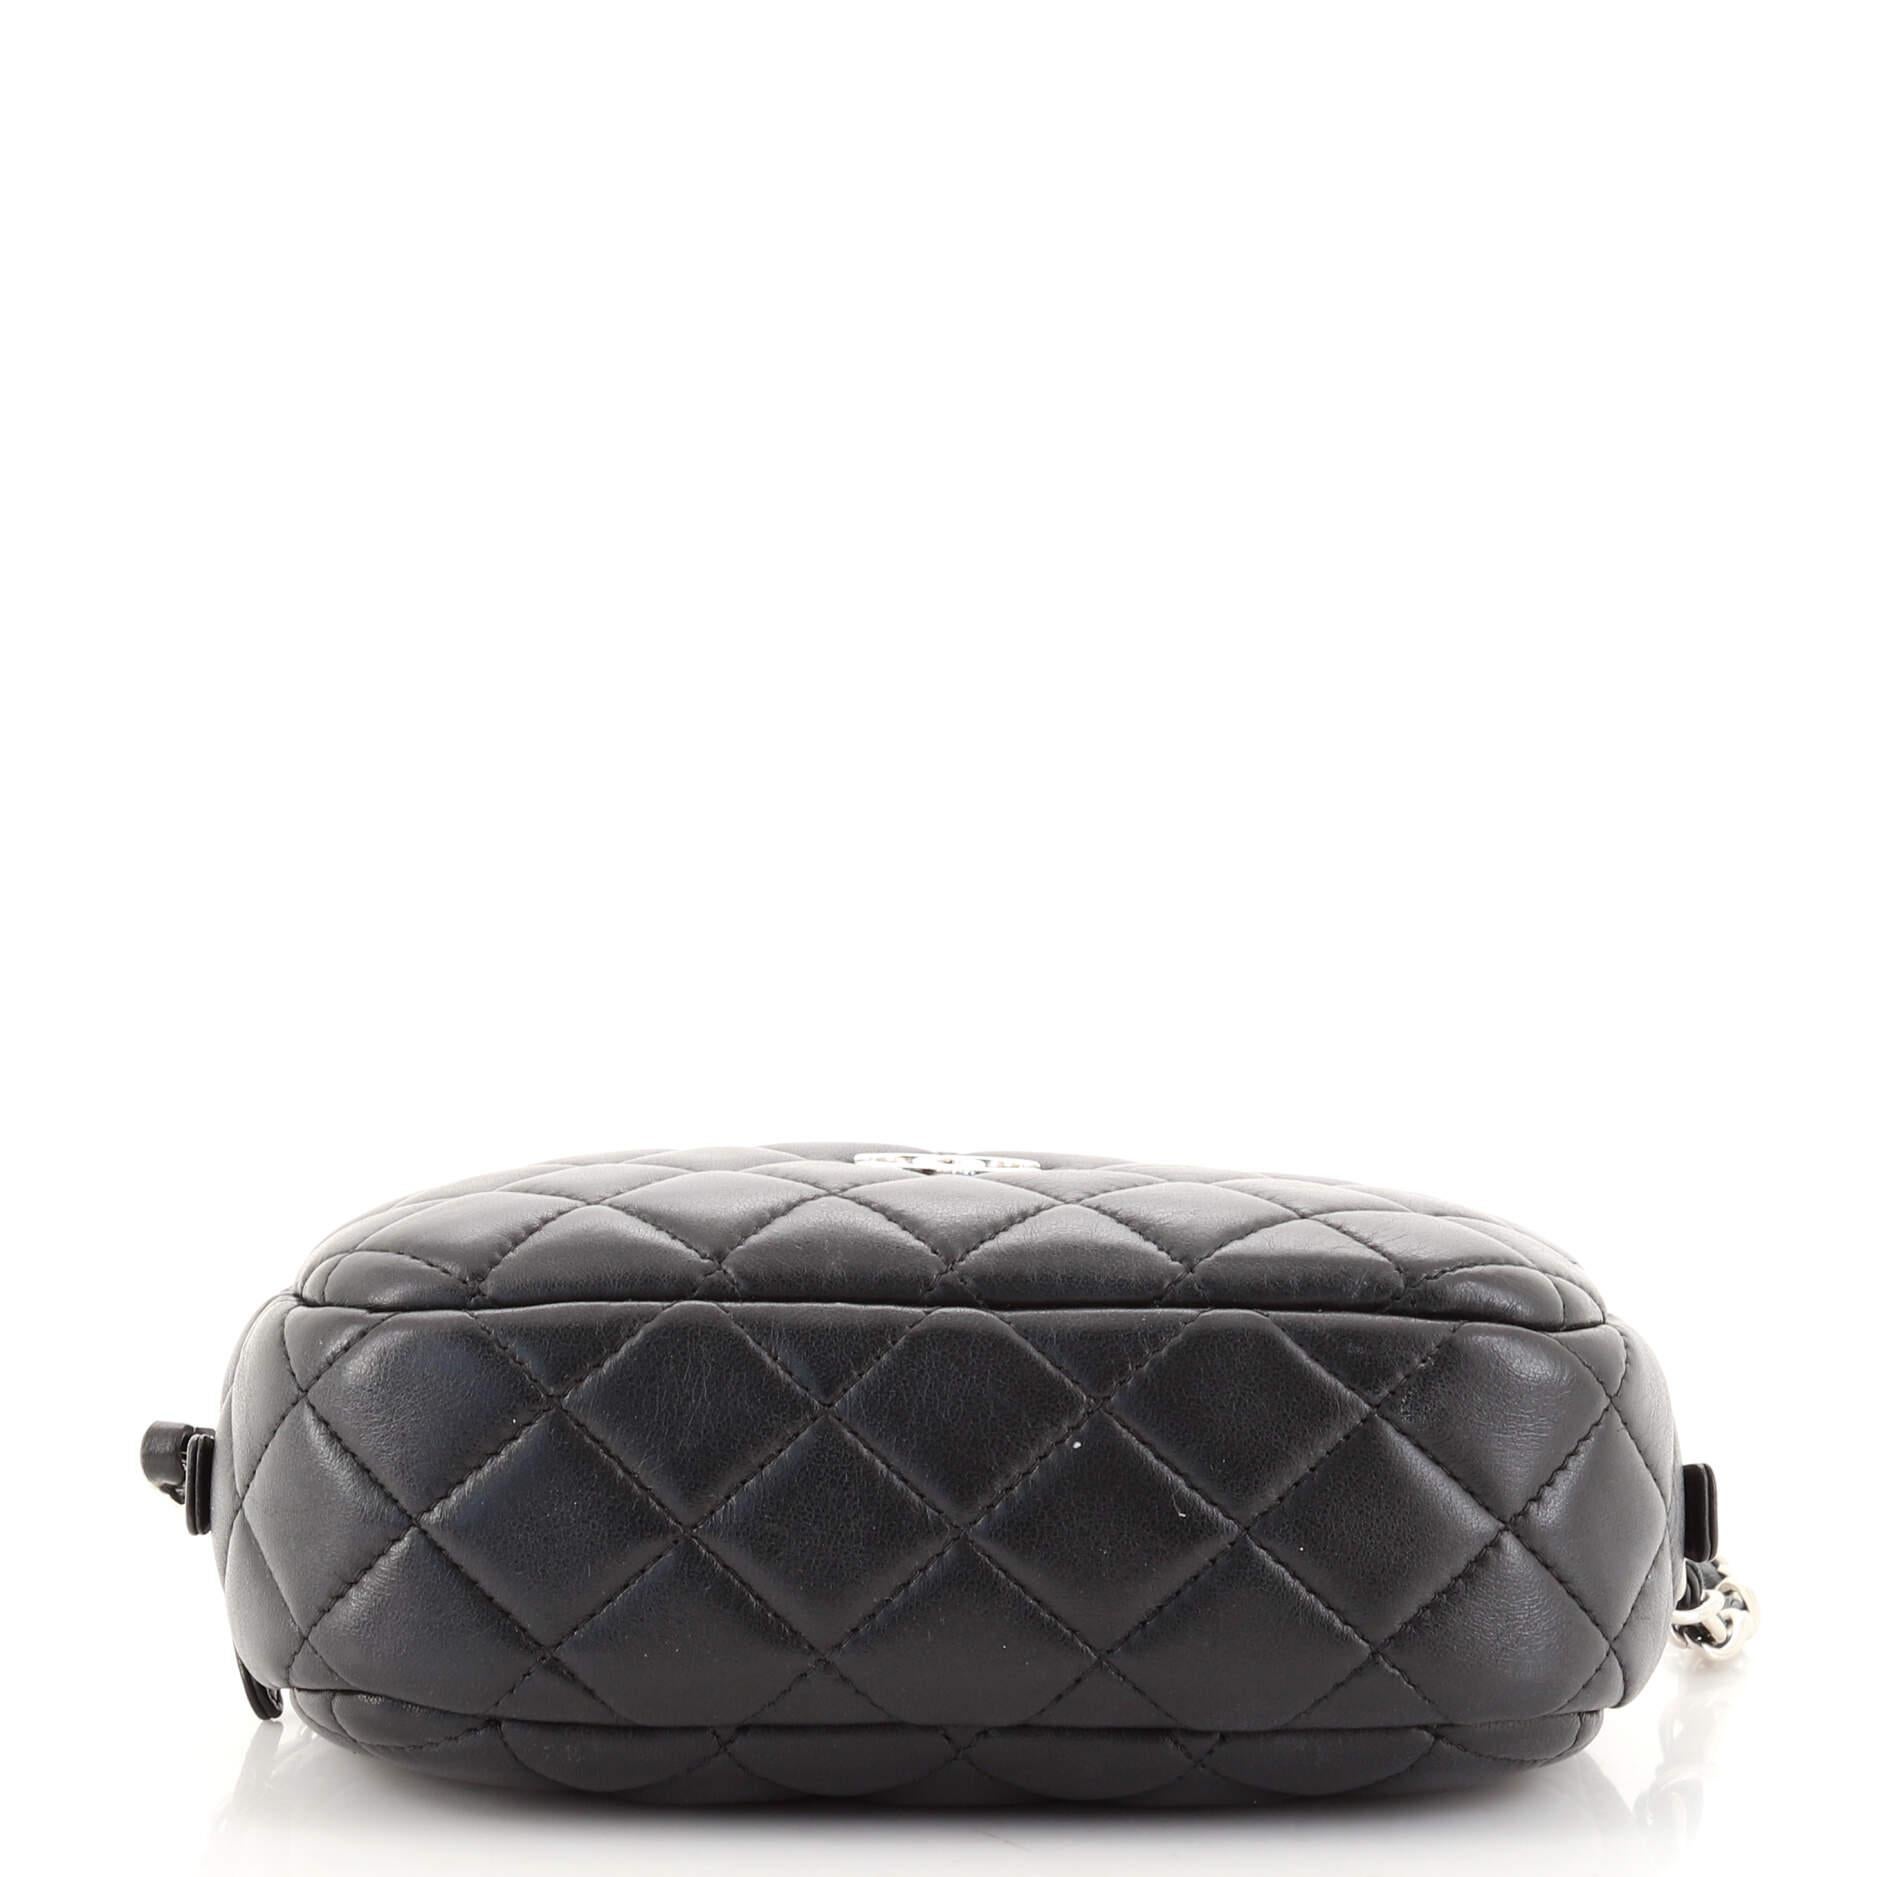 Black Chanel Camera Case Bag Quilted Lambskin Mini